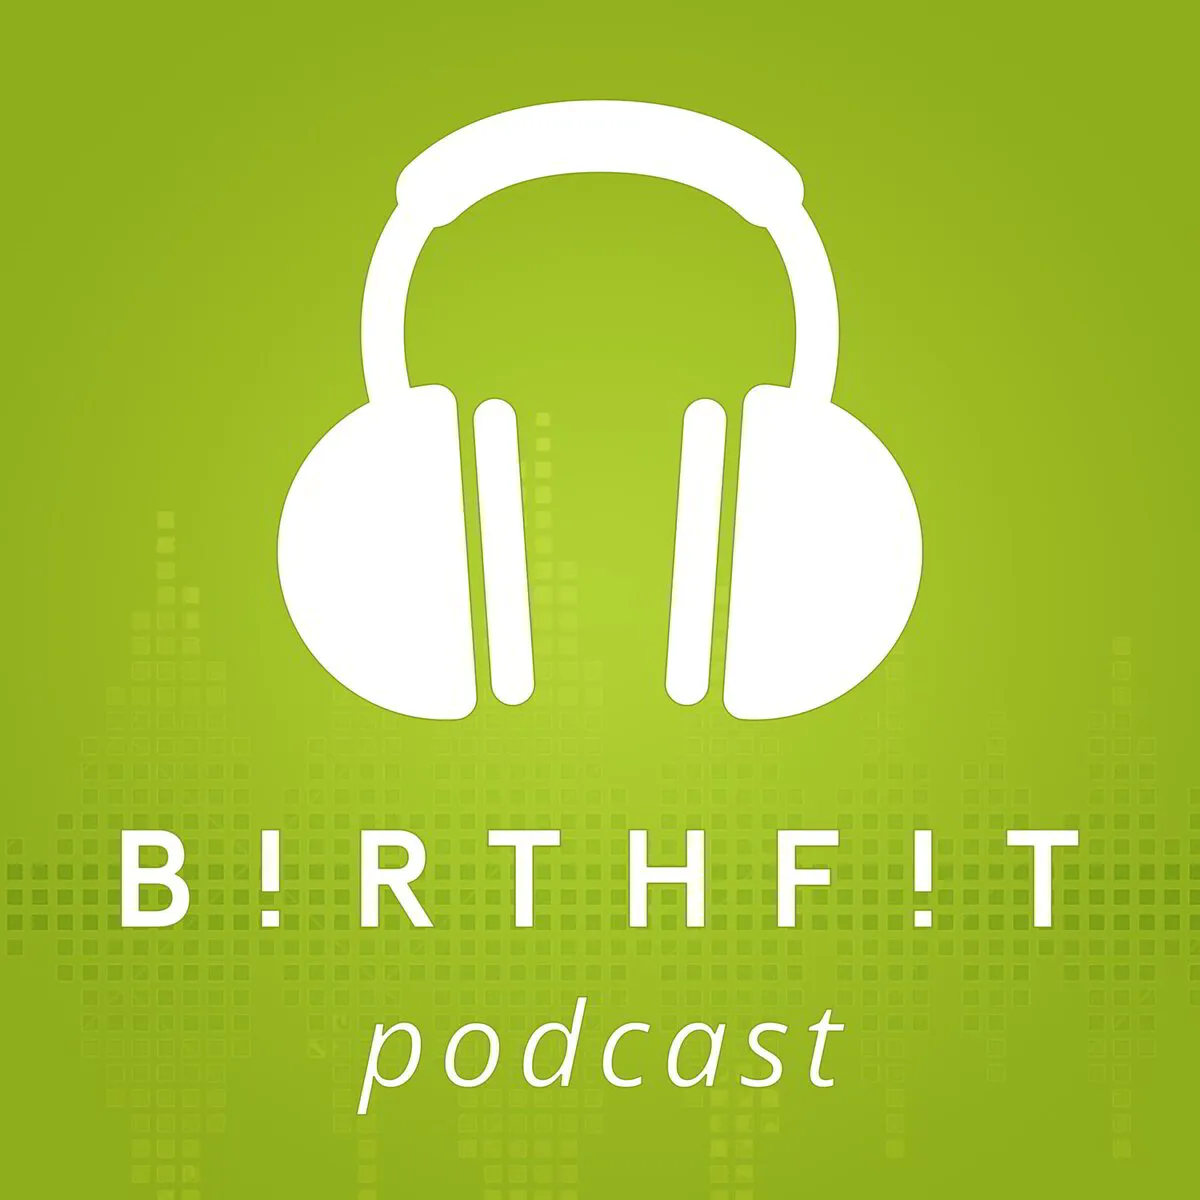 The BIRTHFIT Podcast Episode 85 Featuring Dr. Irene Tobias